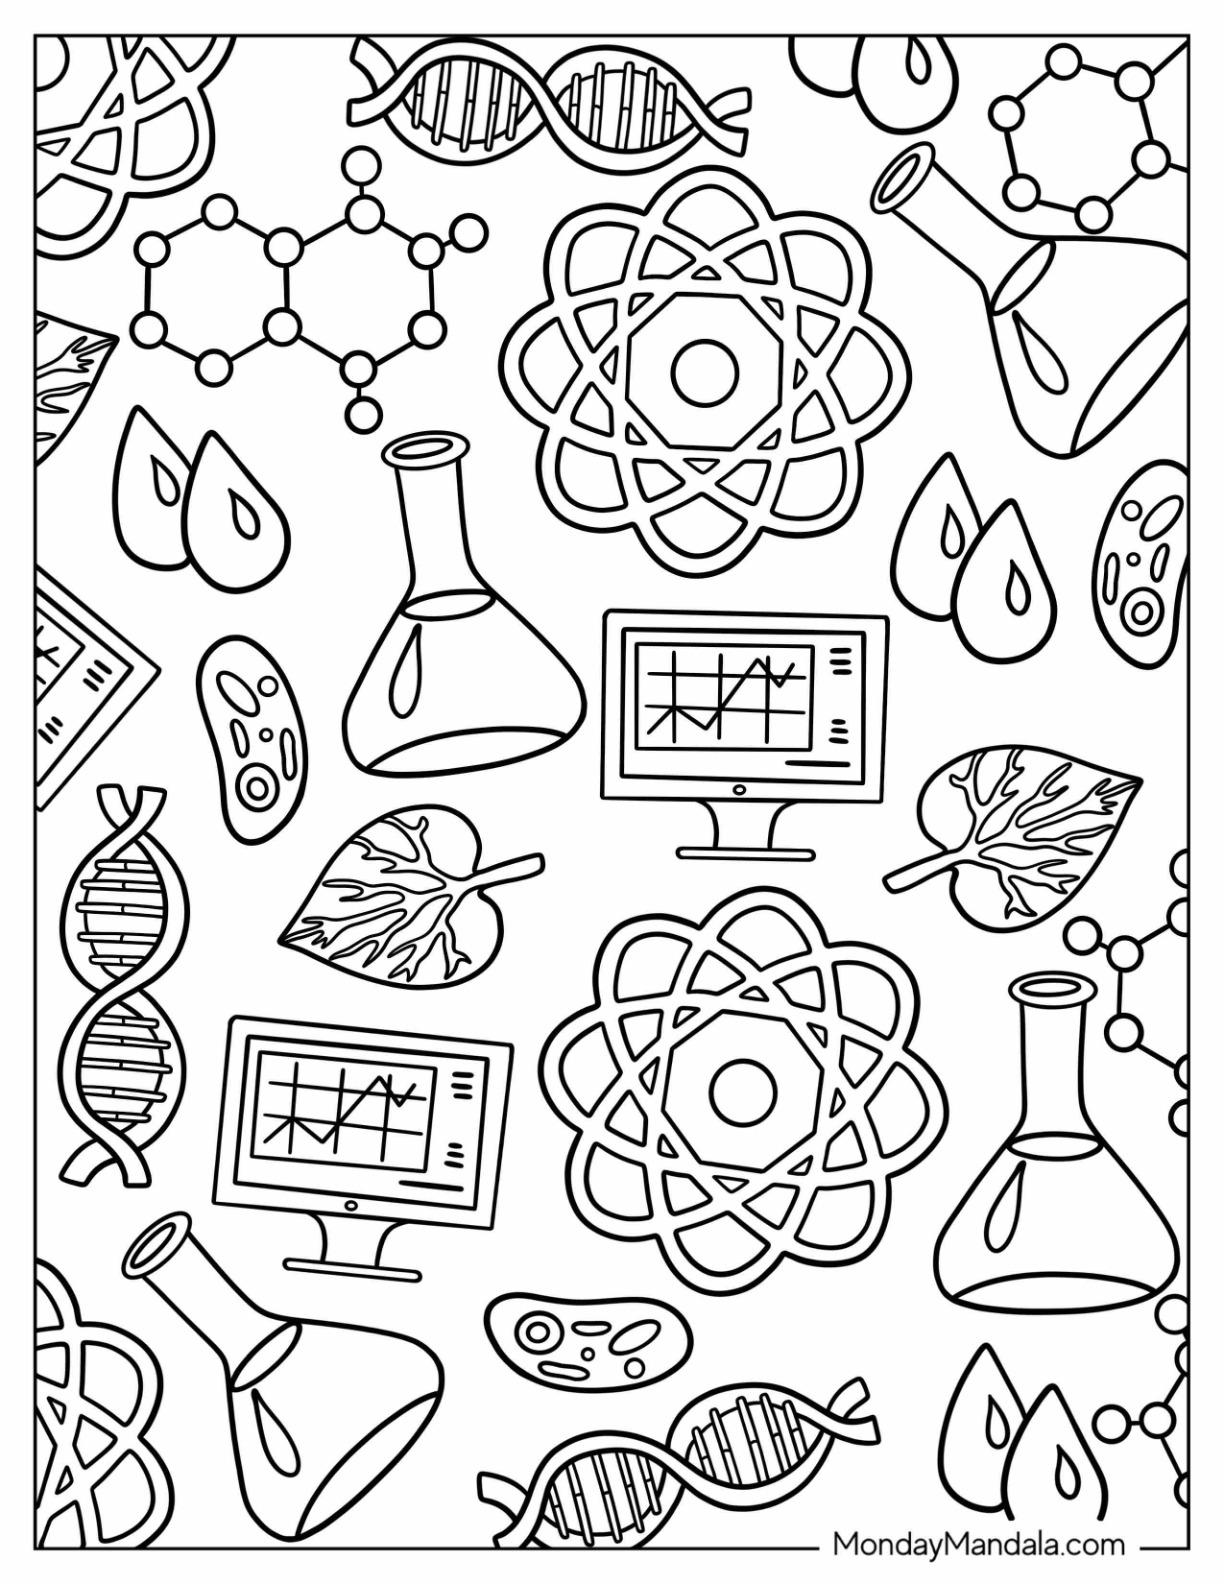 Science coloring pages free pdf printables